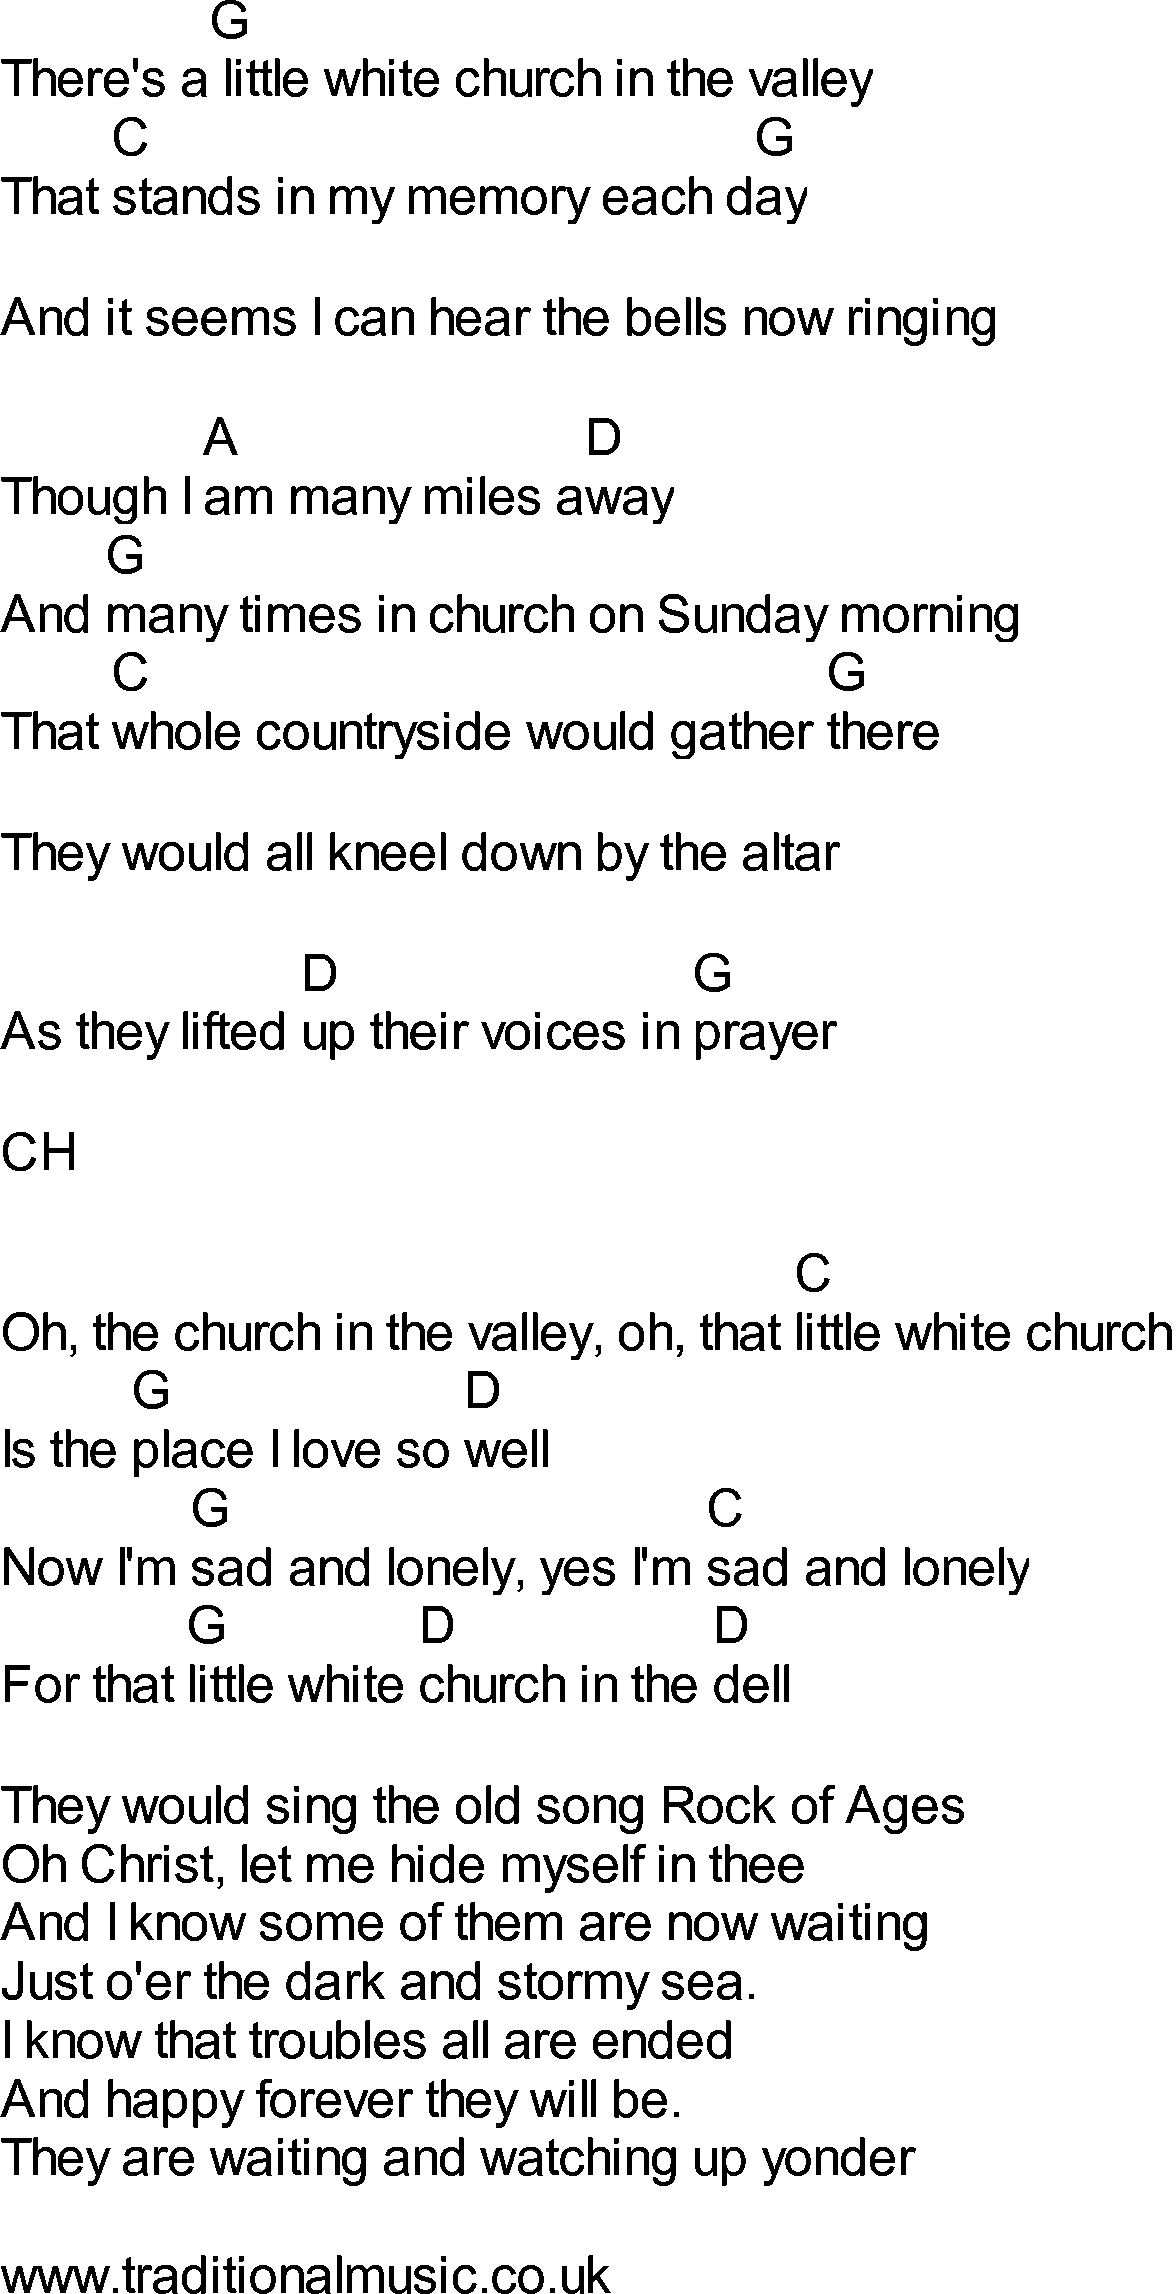 Bluegrass songs with chords - Little White Church